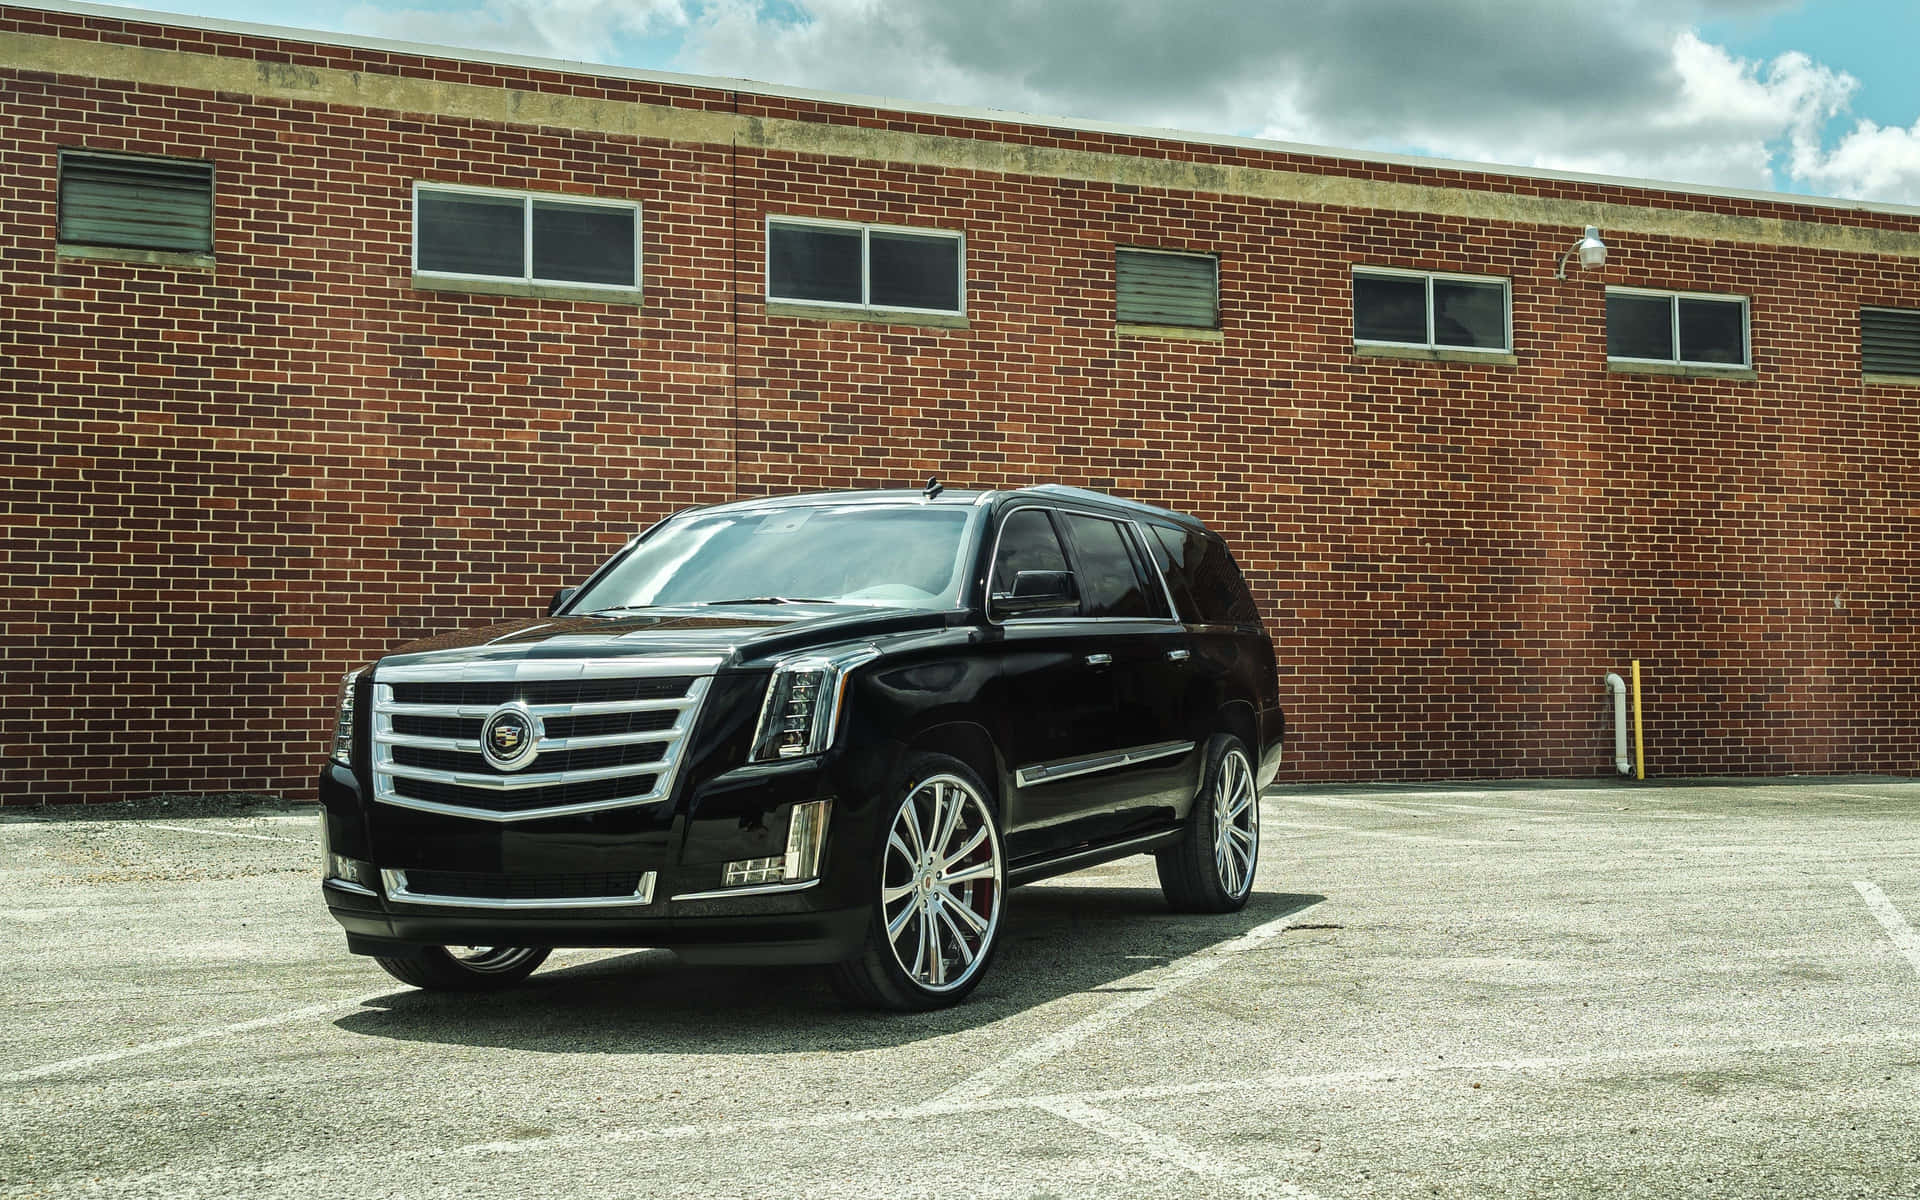 A Luxury Cadillac Escalade on the Road Wallpaper